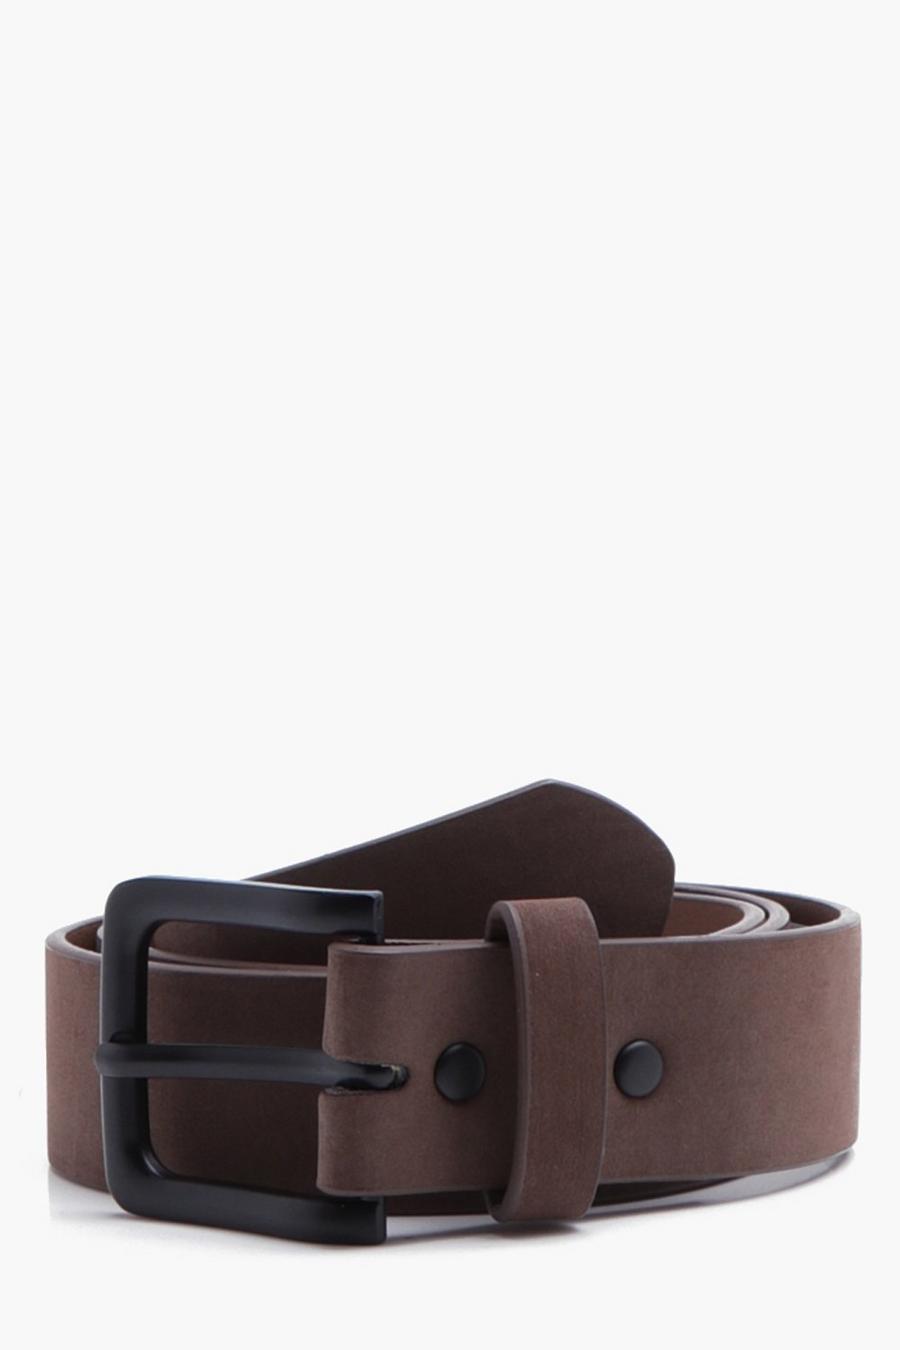 Tan Classic Belt With Matte Finish image number 1